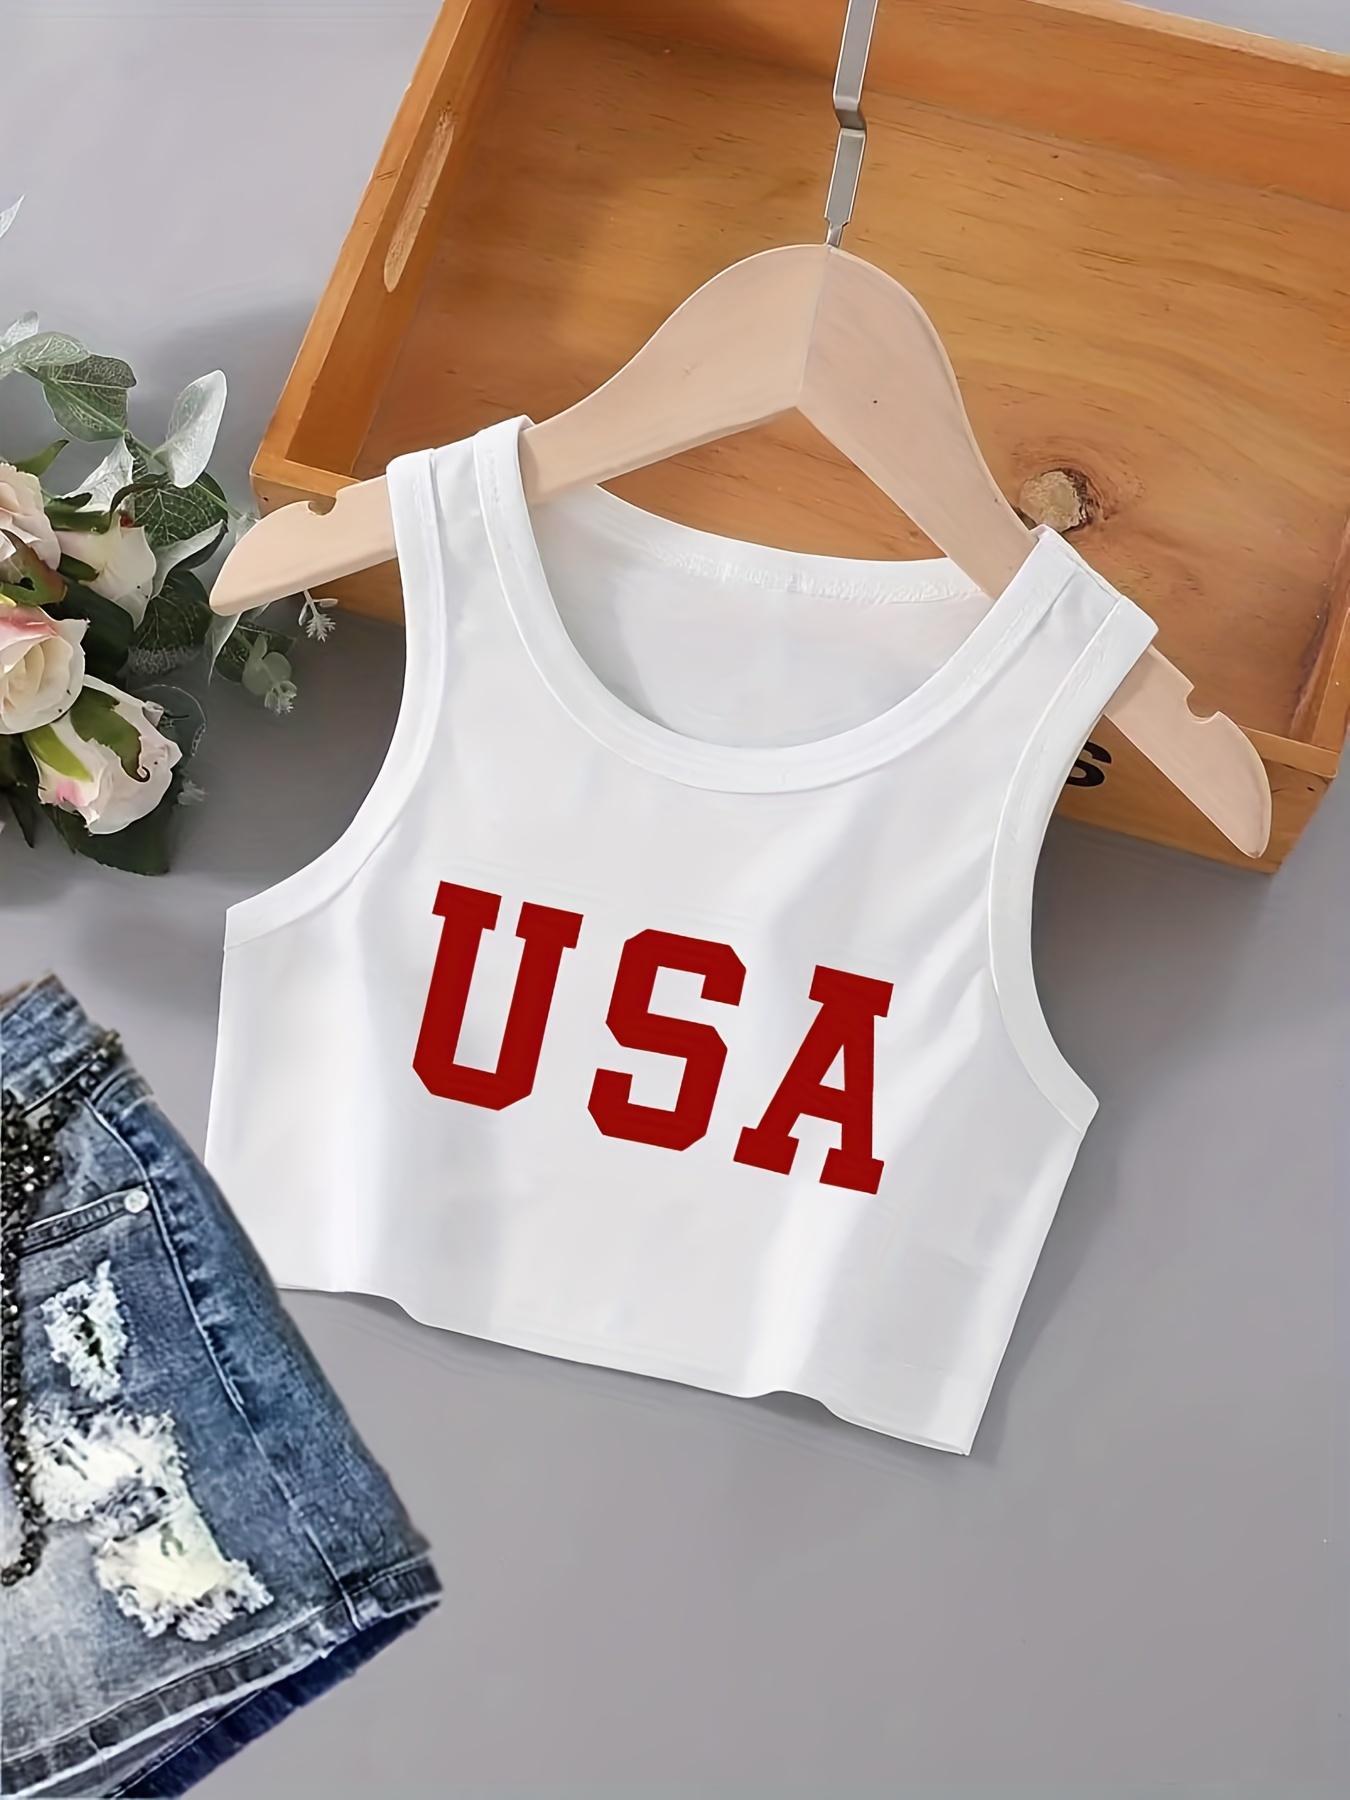 Girls 'USA' Tank Tops Sleeveless Cropped T-Shirts For Sports Casual Kids  Summer Outfit